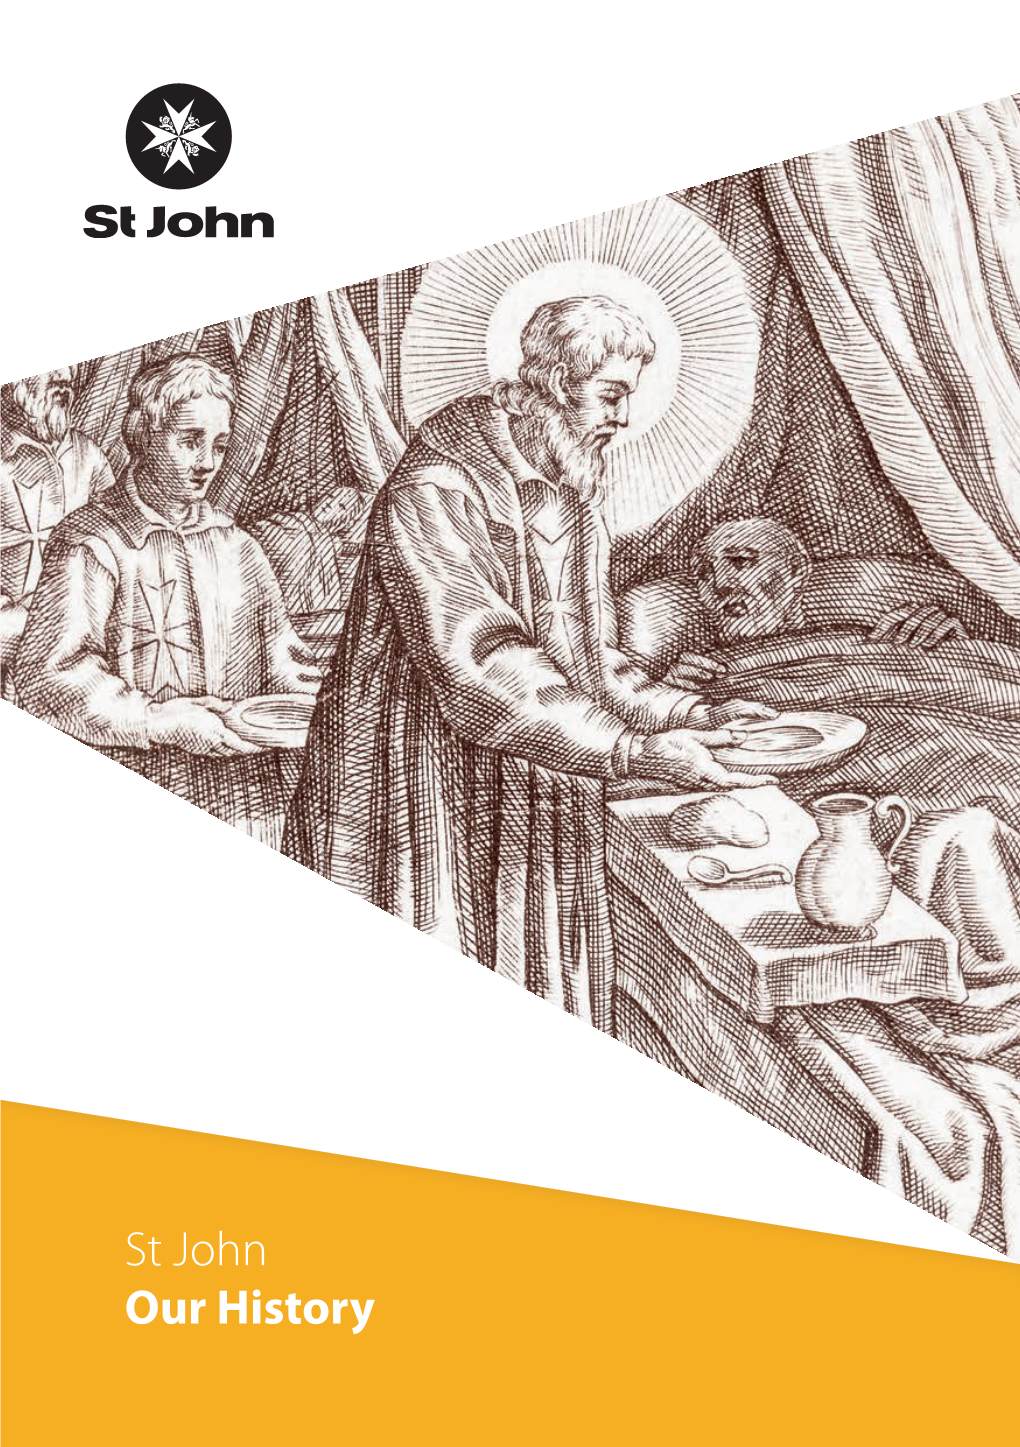 St John Our History St John – an Order of Chivalry